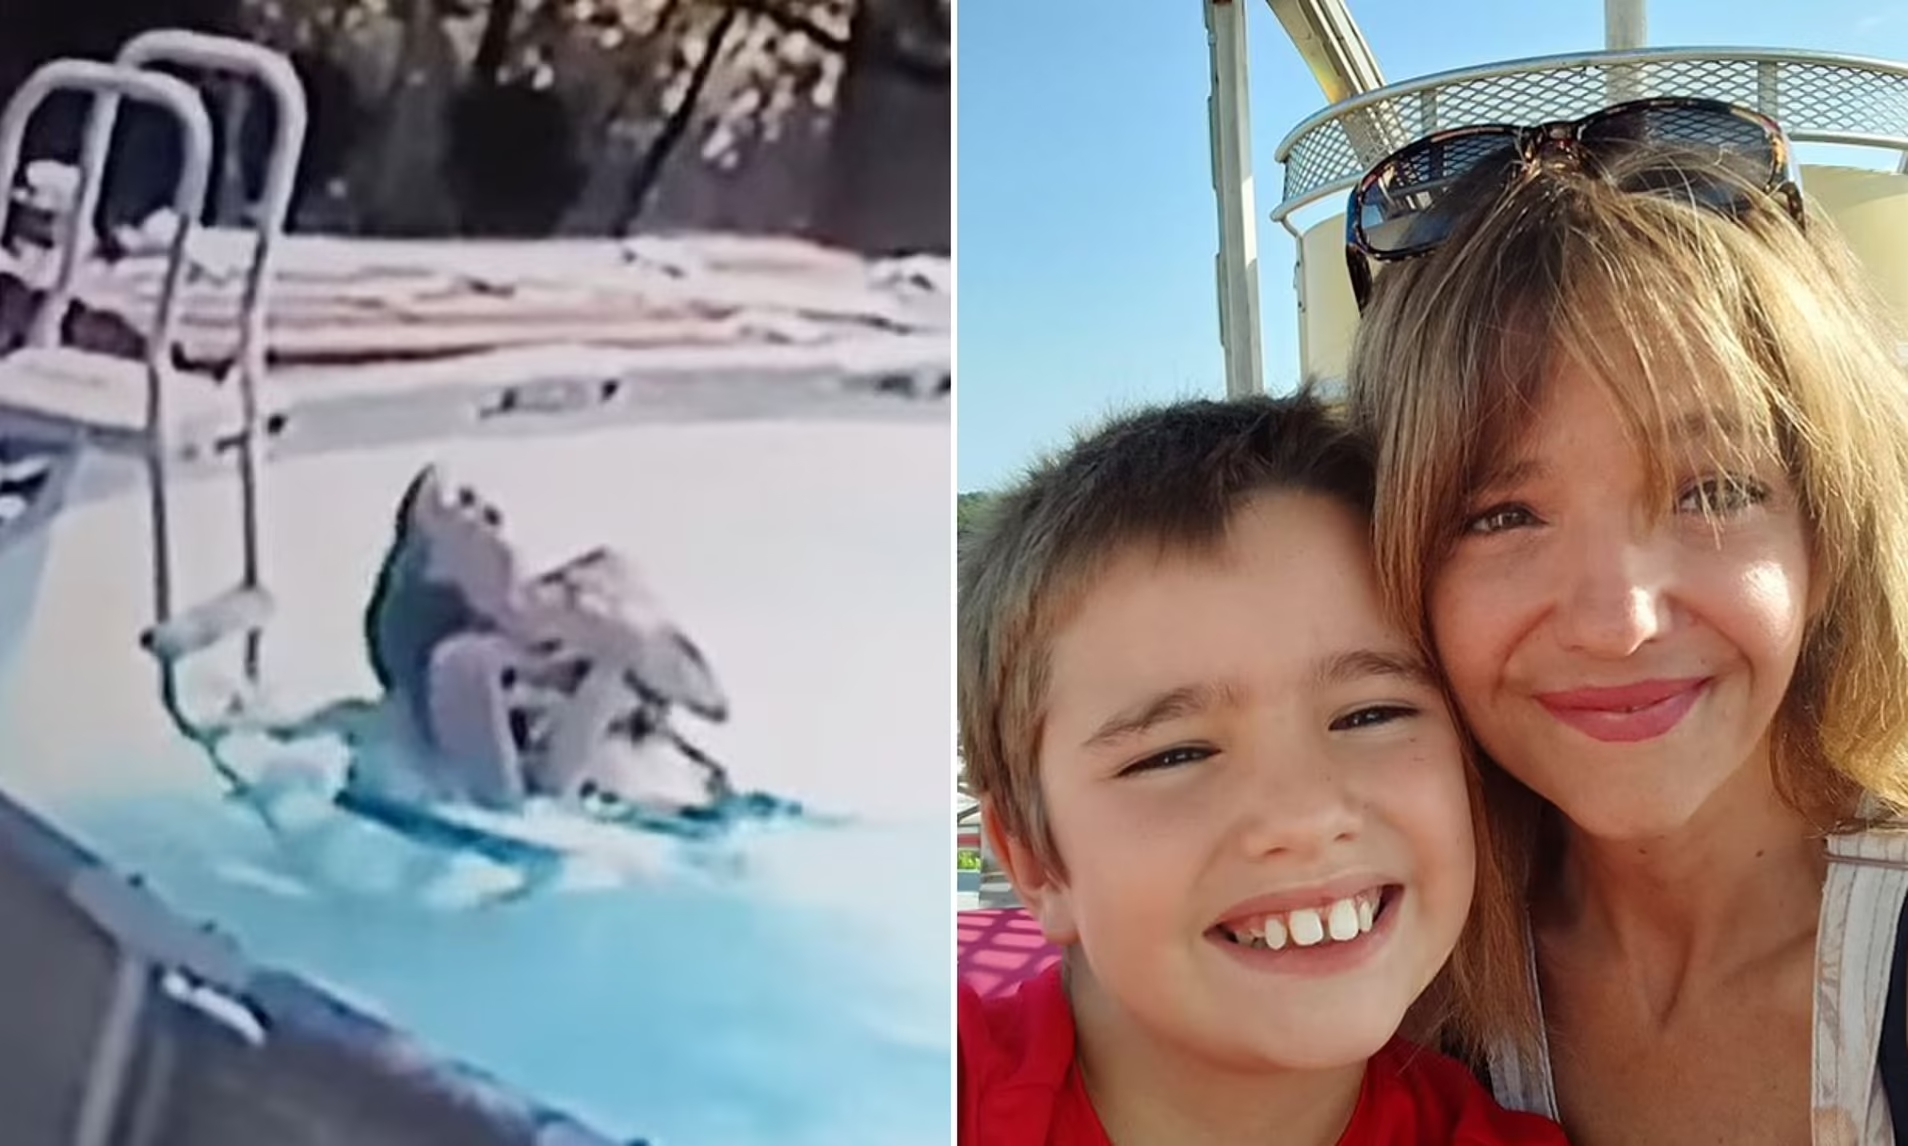 10-year-old Gavin saved his mother from drowning; Gavin and his mother Lori smiling for a selfie